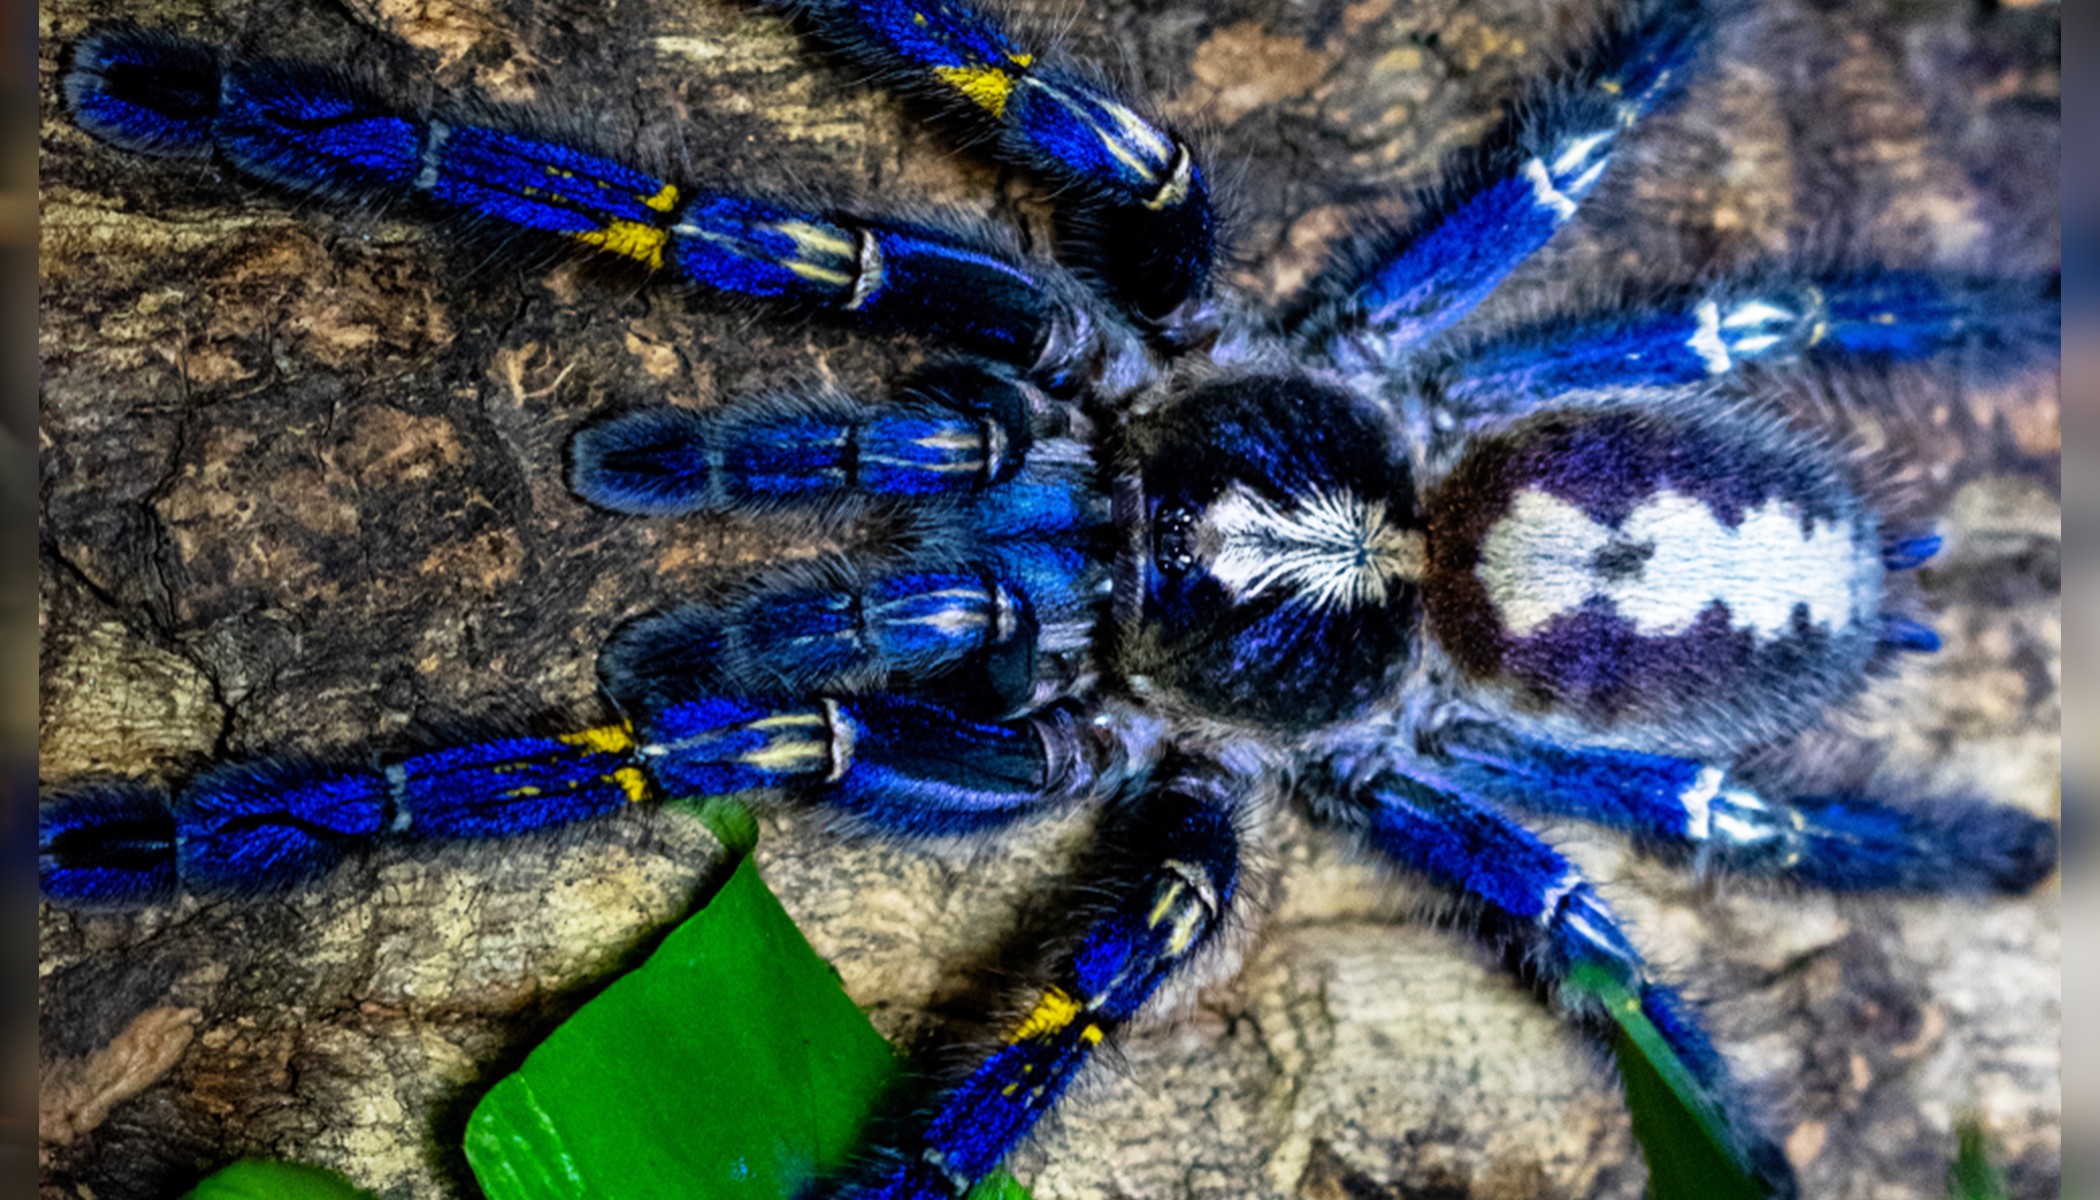 Electric Blue Peacock Tarantula May Be One Of The Most Eye Catching Endangered Species